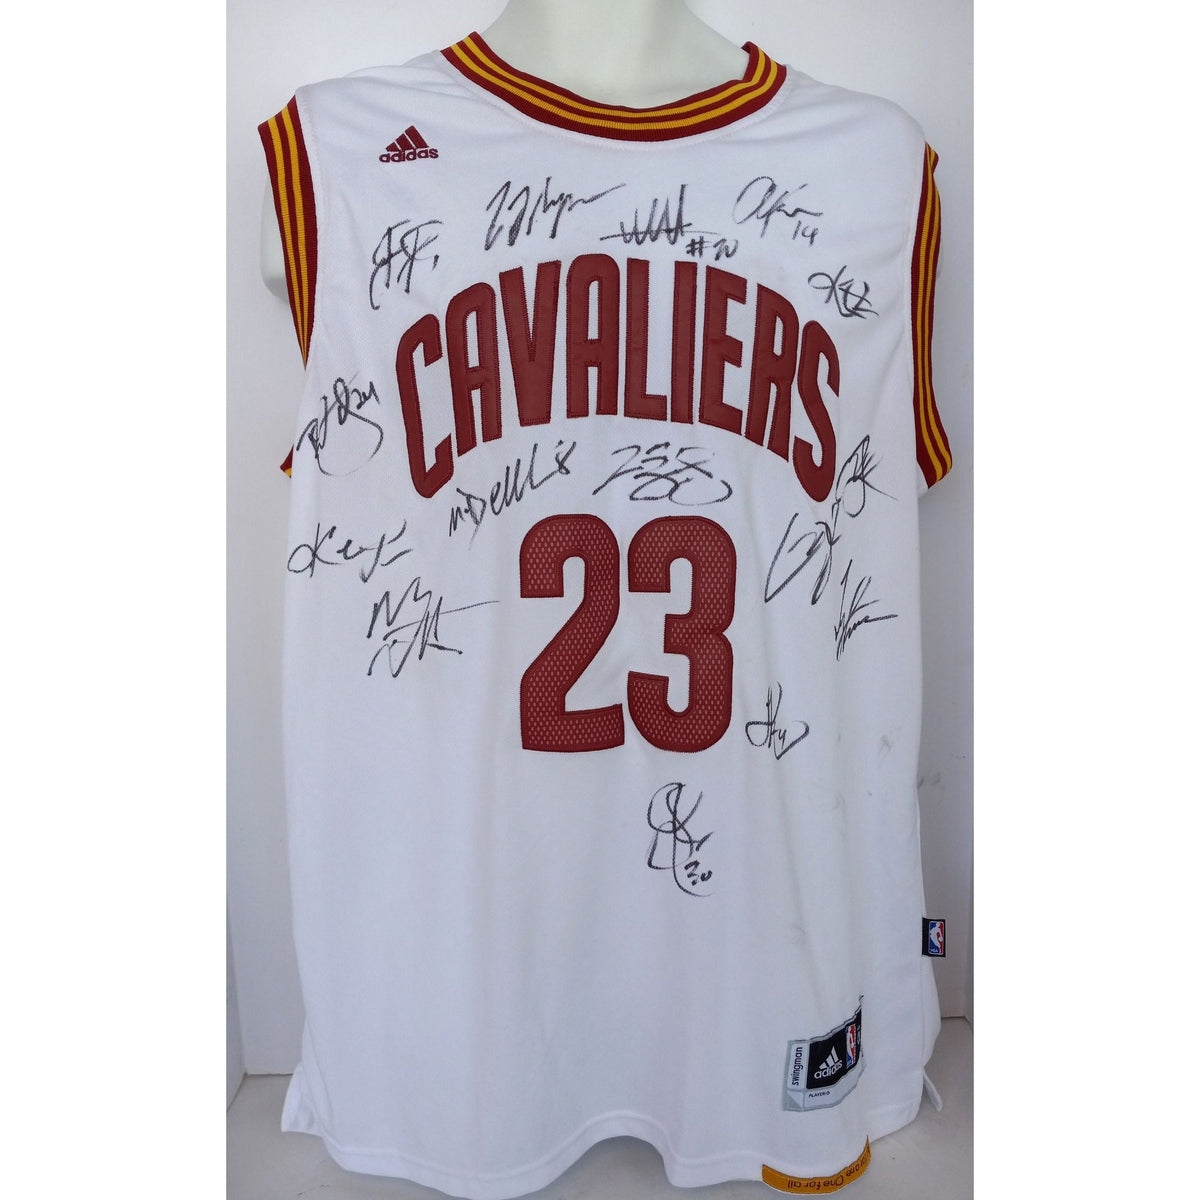 Lot Detail - 2/22/2016 LEBRON JAMES SIGNED CLEVELAND CAVALIERS  (CHAMPIONSHIP SEASON) GAME WORN HOME JERSEY - 12 PTS. & 8 REB. VS. PISTONS ( NBA SOURCE, PHOTO-MATCHED)